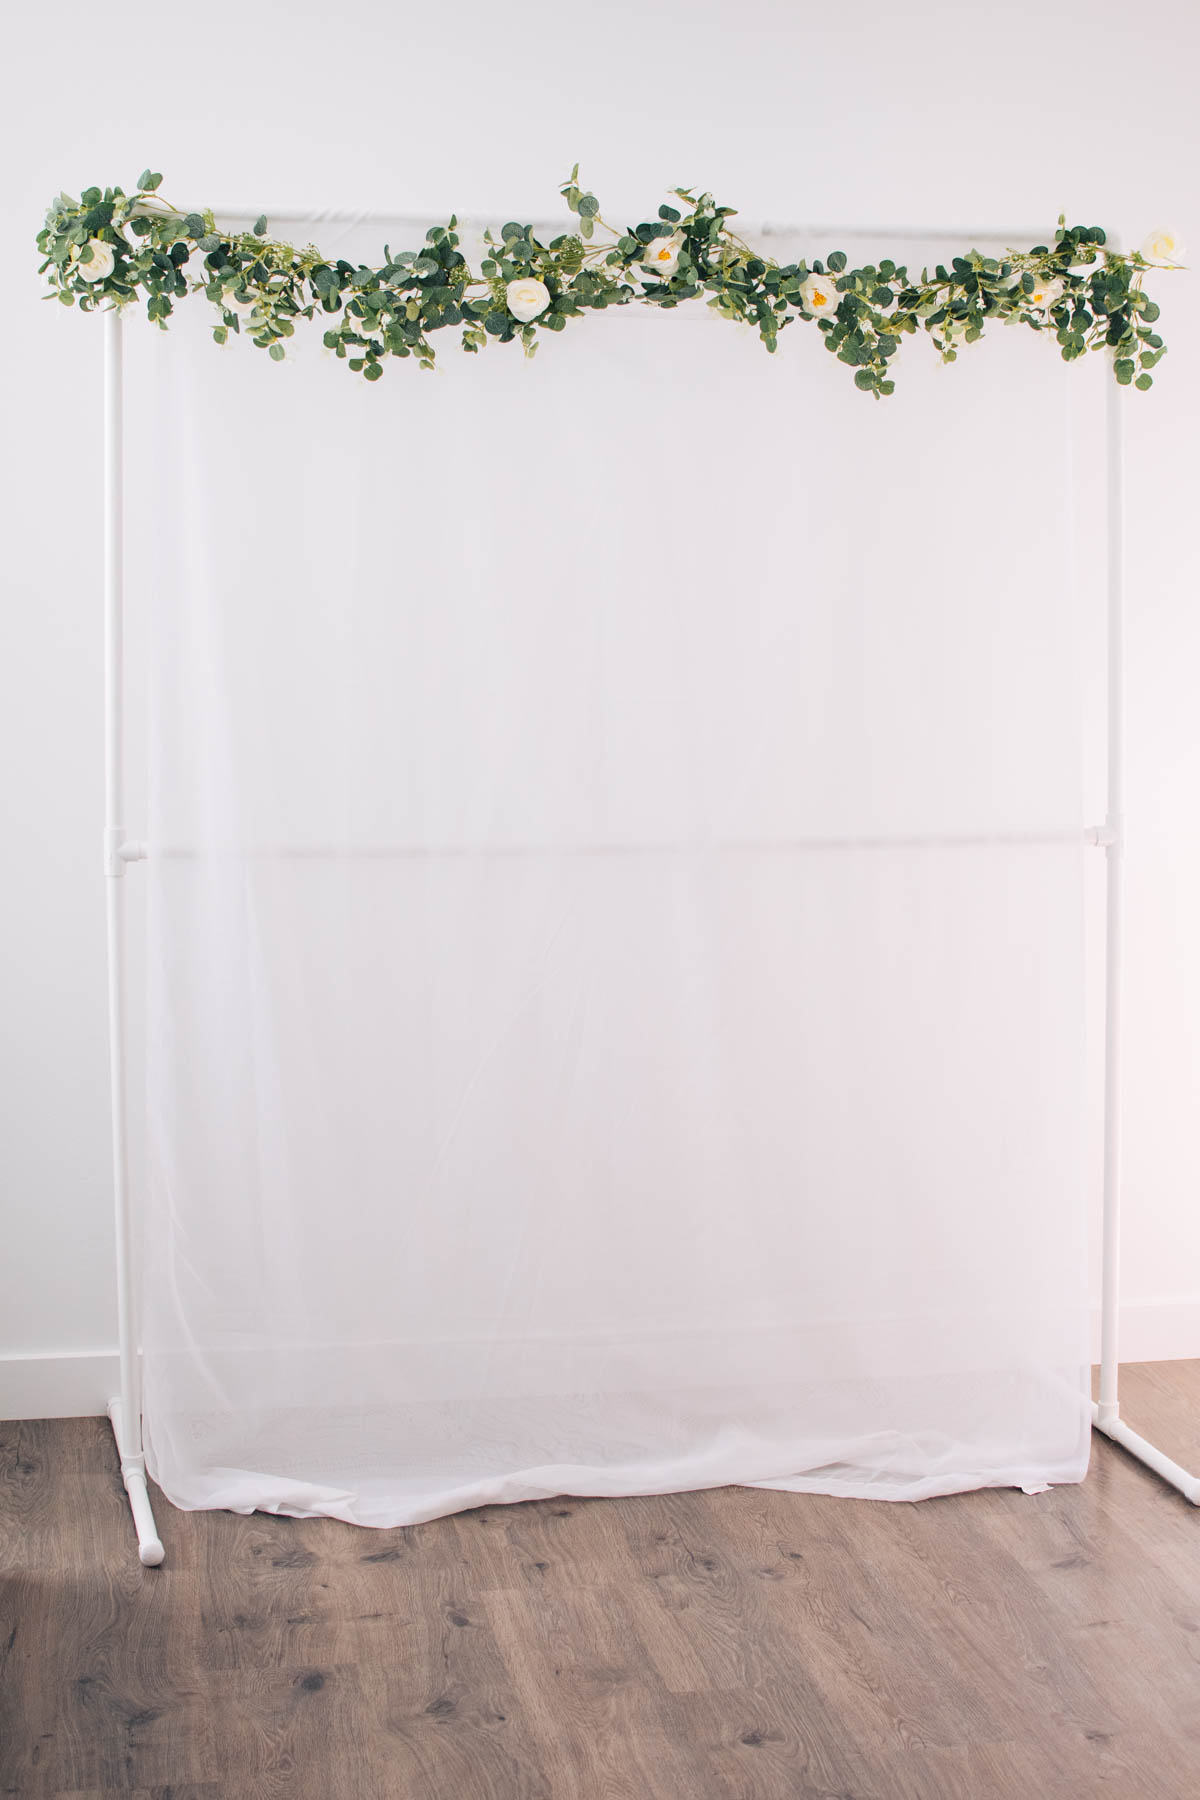 PVC backdrop stand with sheer curtain and floral garland draped along the top in empty room.